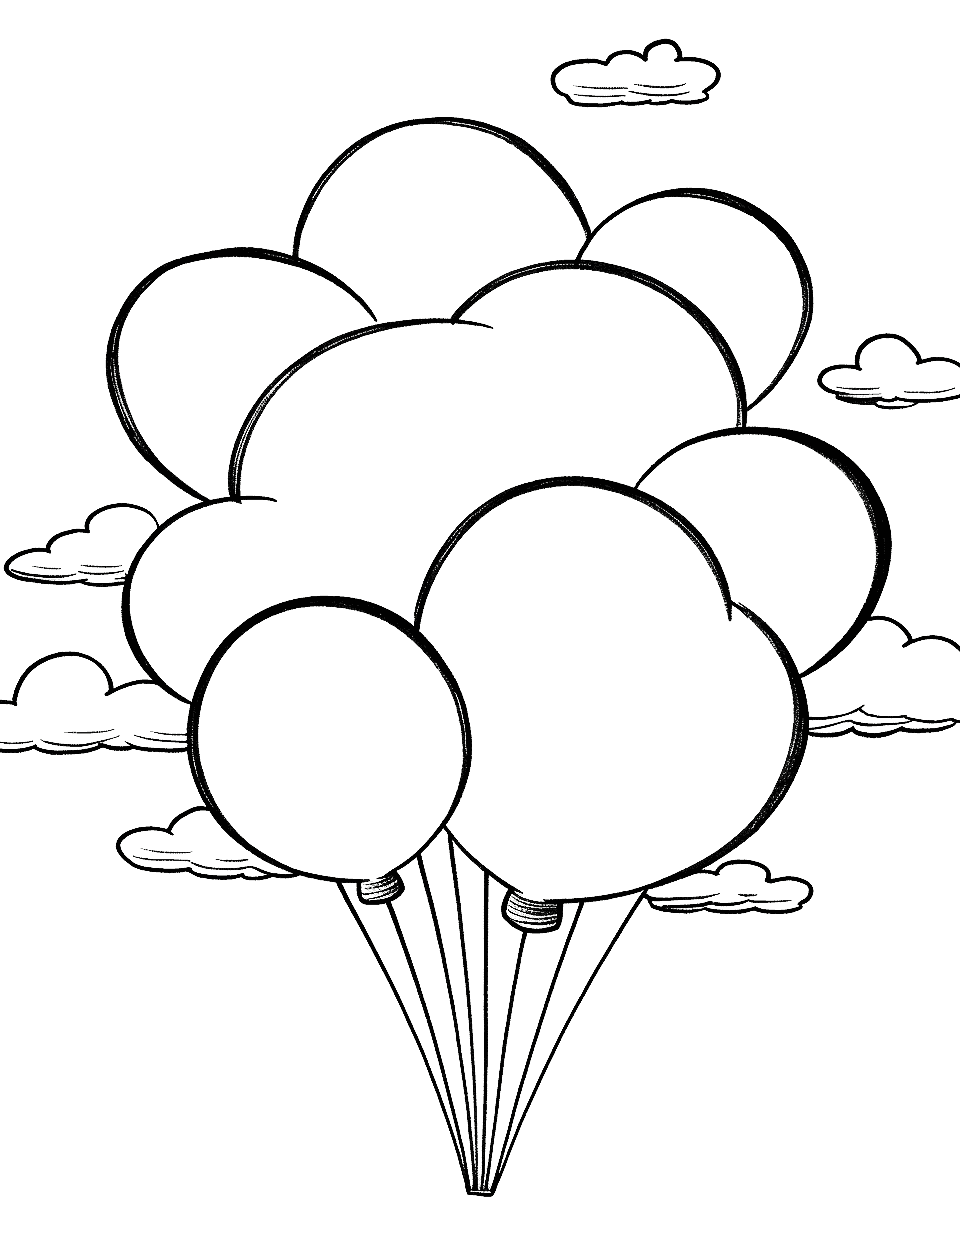 Fluffy Clouds and Balloons Cute Coloring Page - White clouds with colorful balloons floating among them.